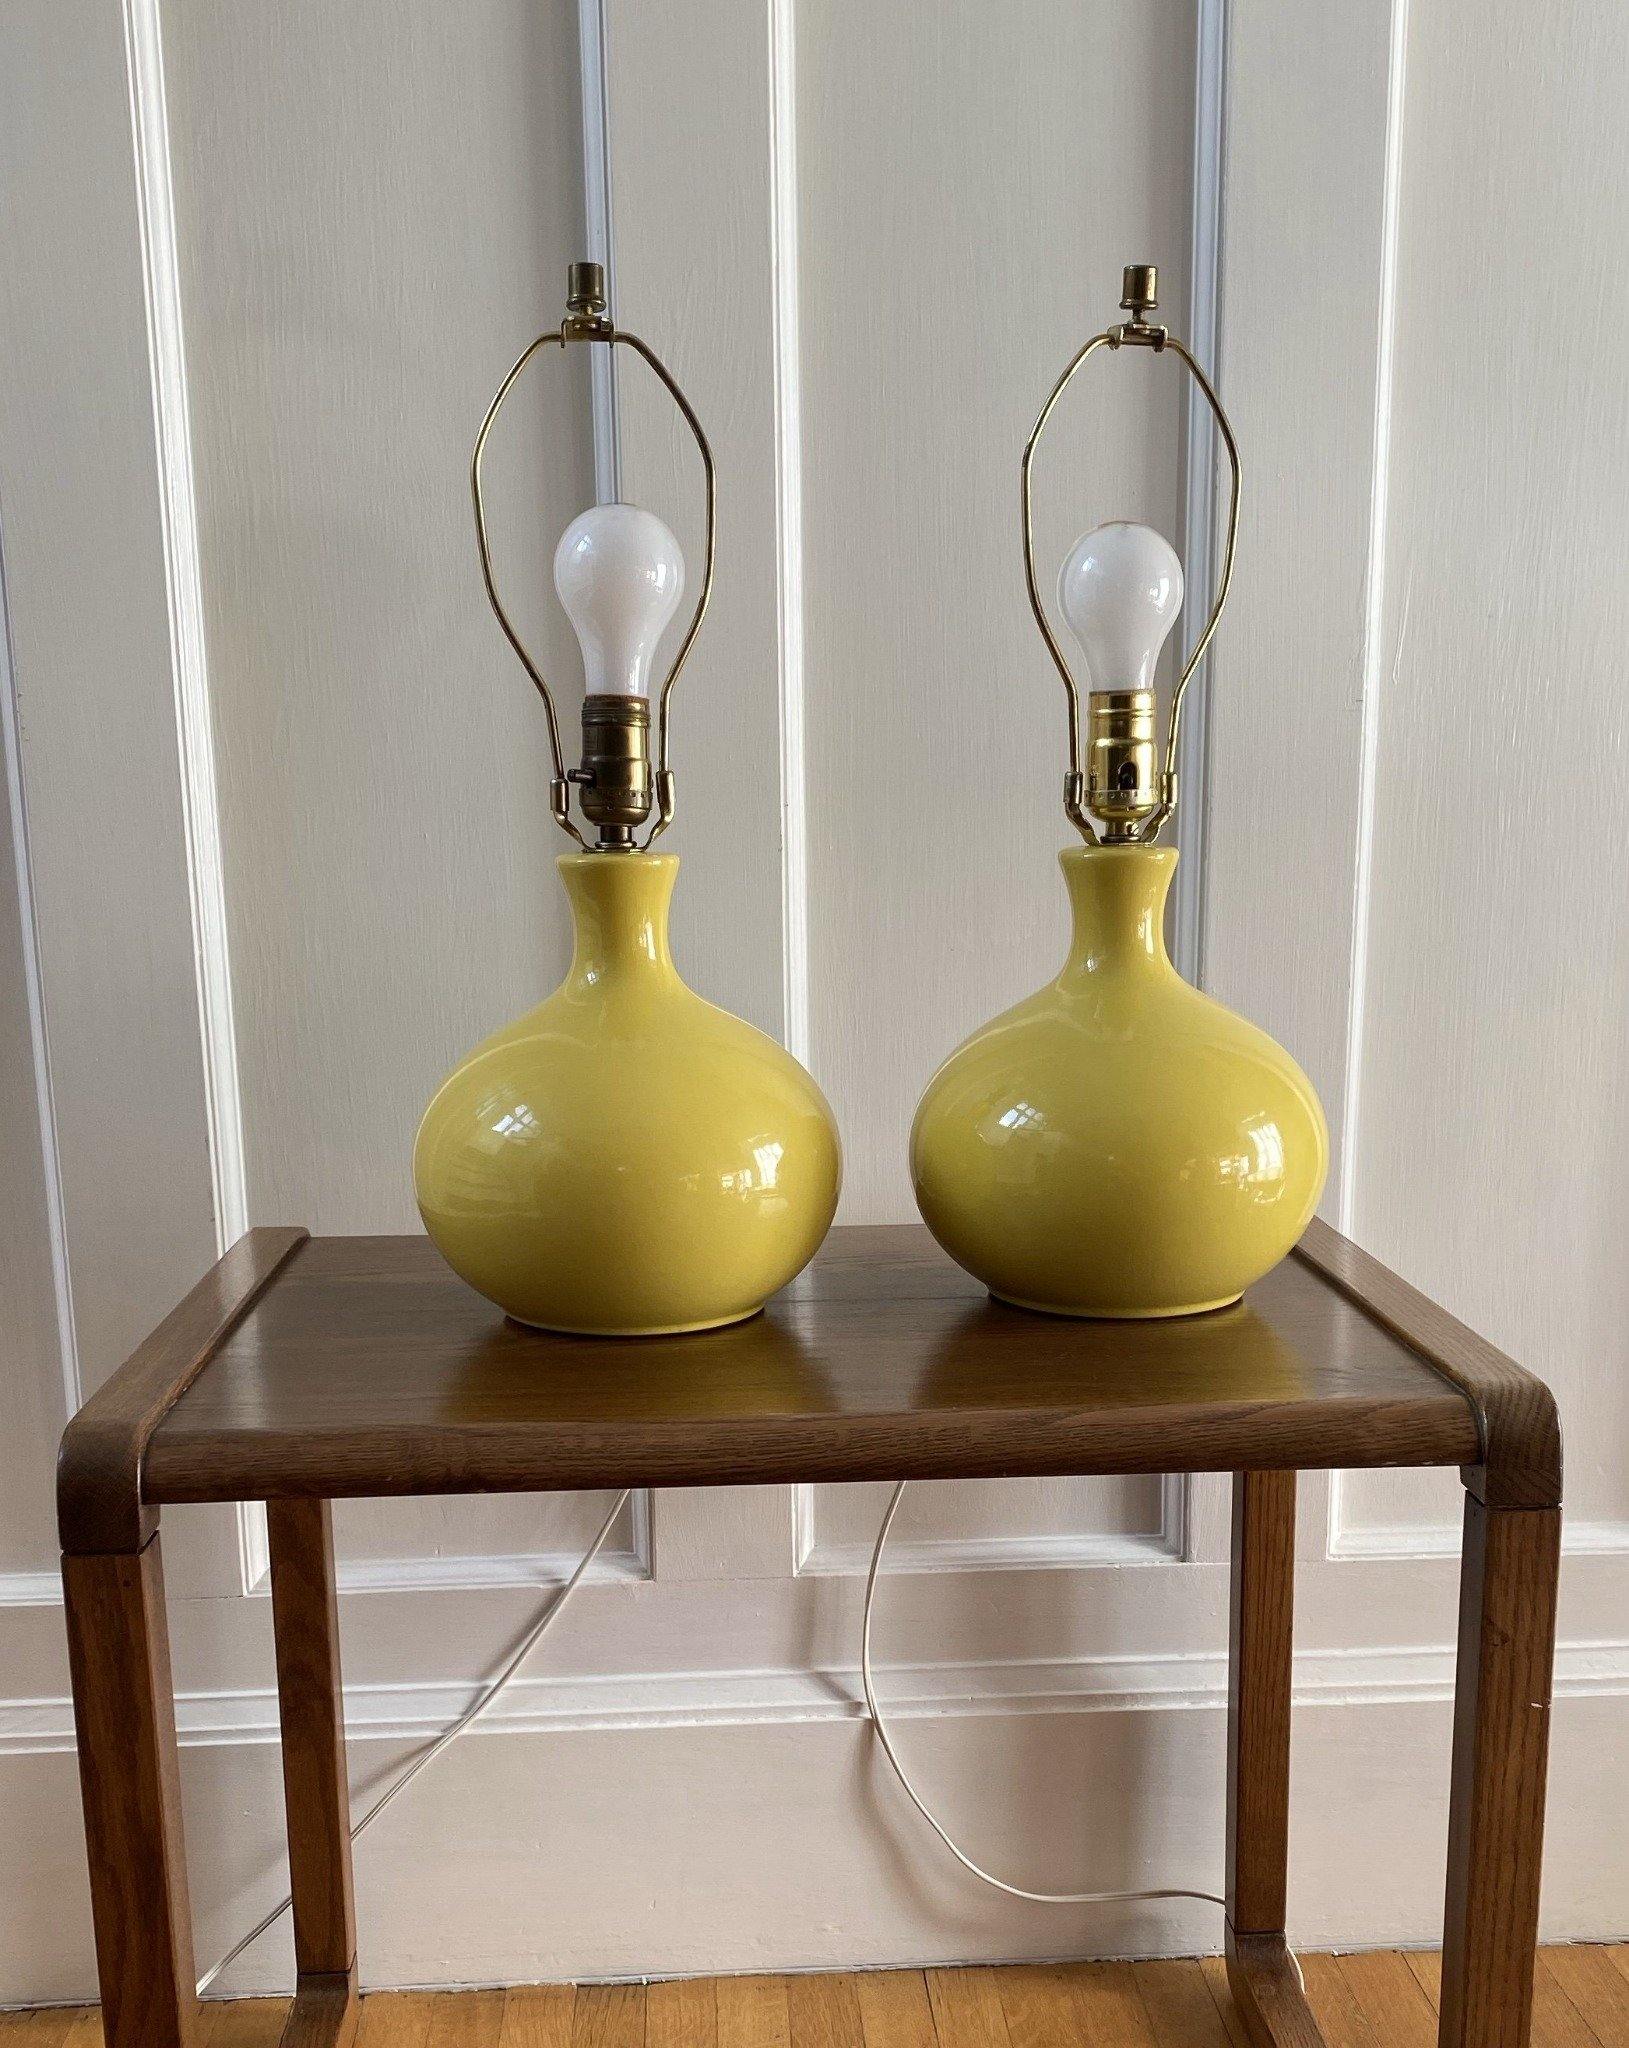 Pair of yellow ceramic table lamps on teak table- Cook Street Vintage